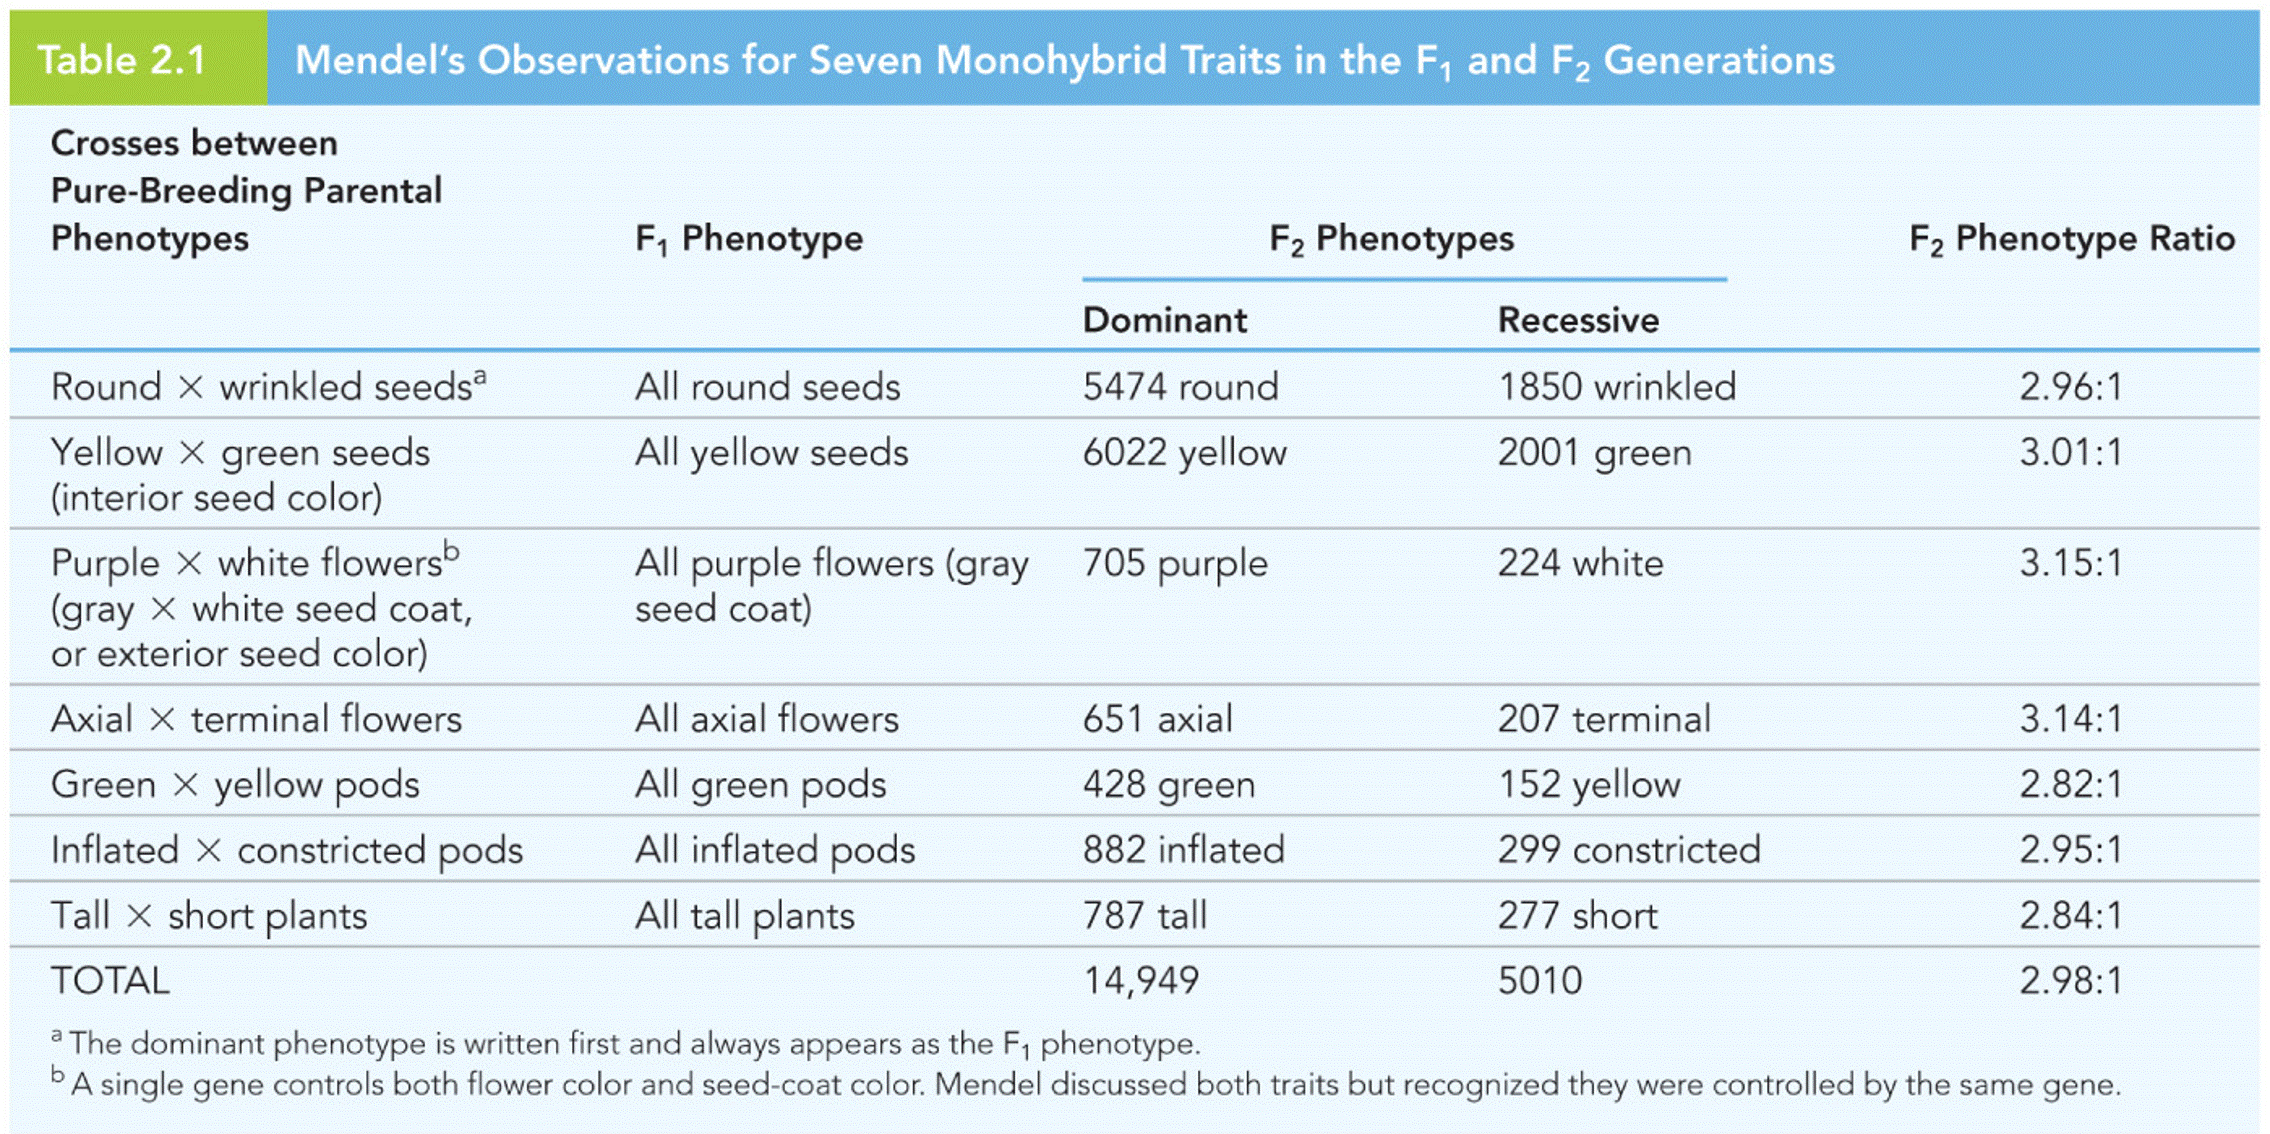 Mendel’s Observations for Seven Monohybrid Traits in the F1 and F2 Generations